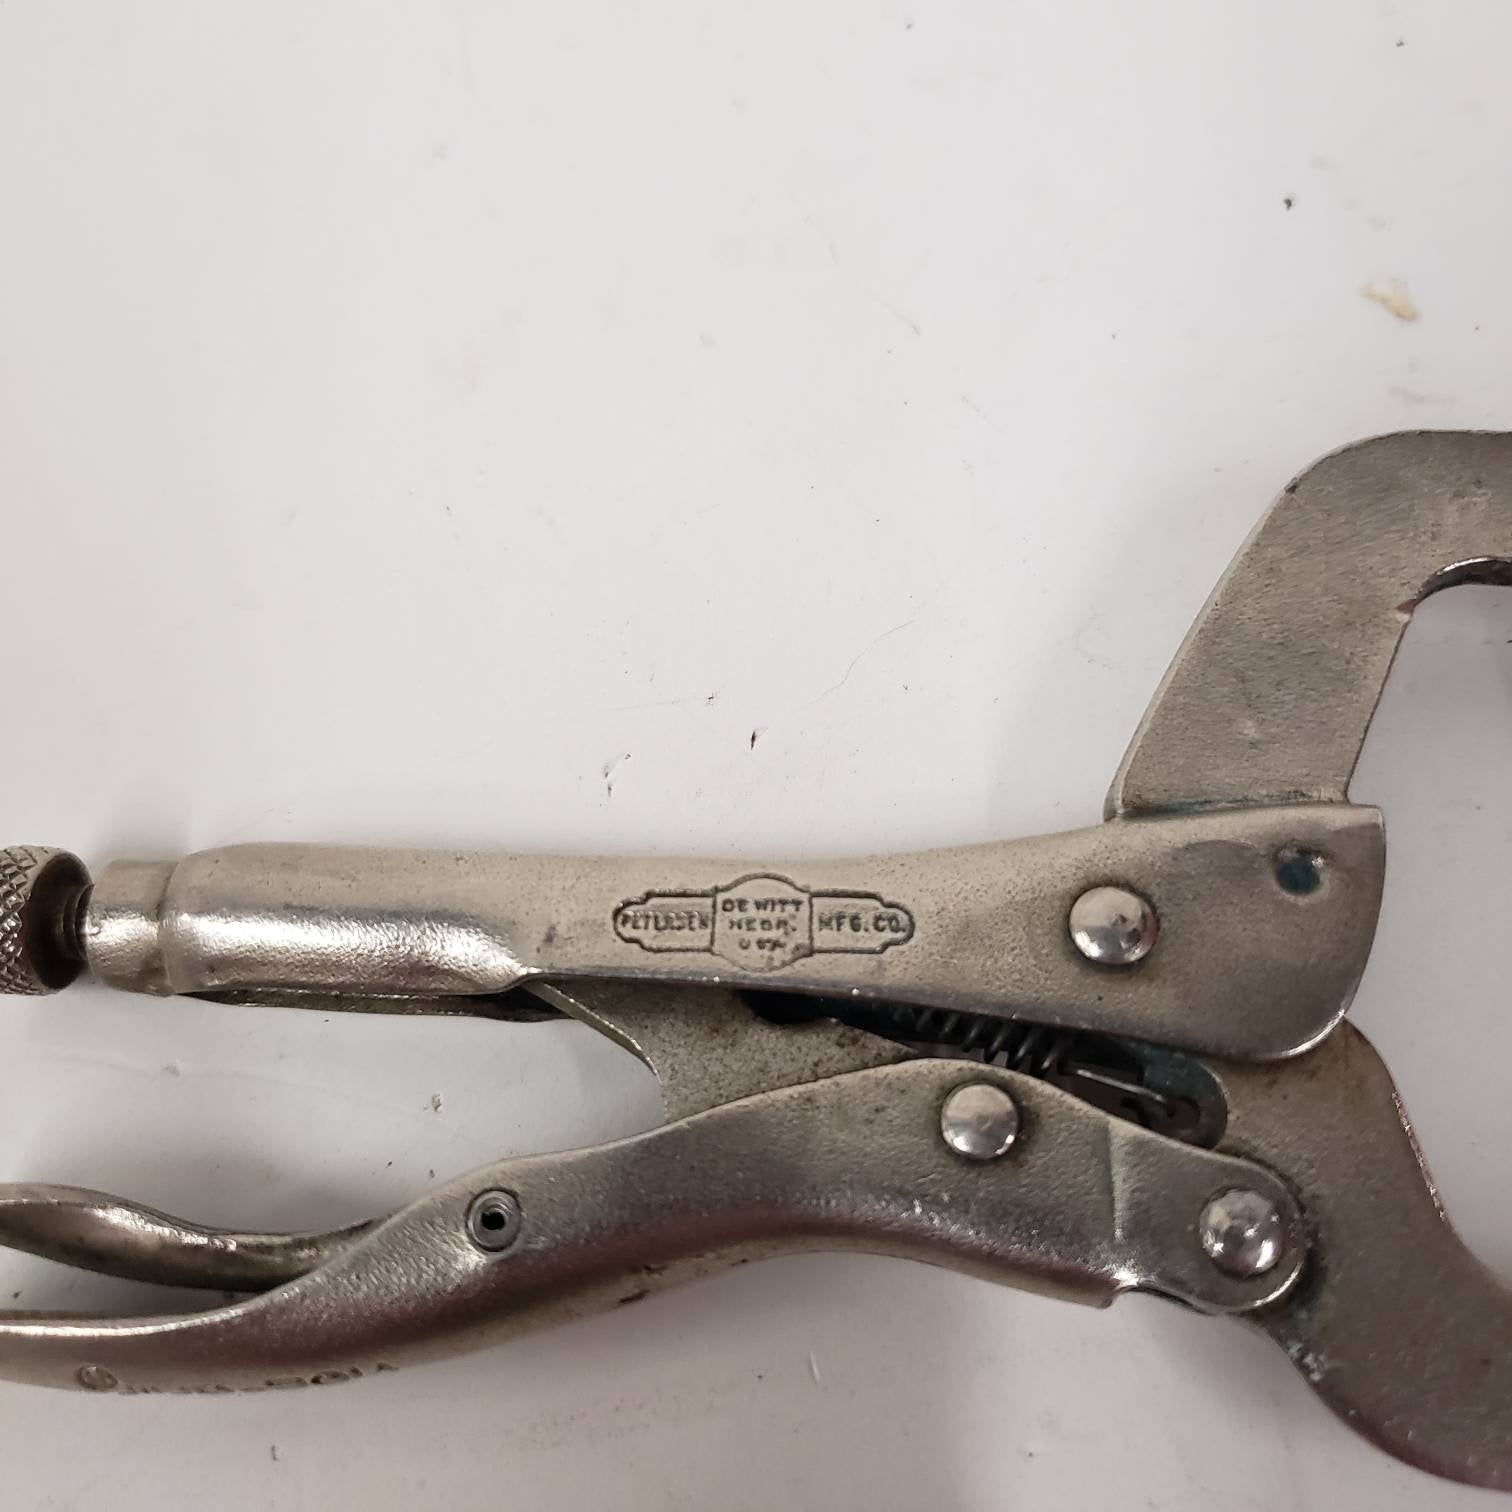 vise-grip welding clamp long arm locking jaw hand tools pliers